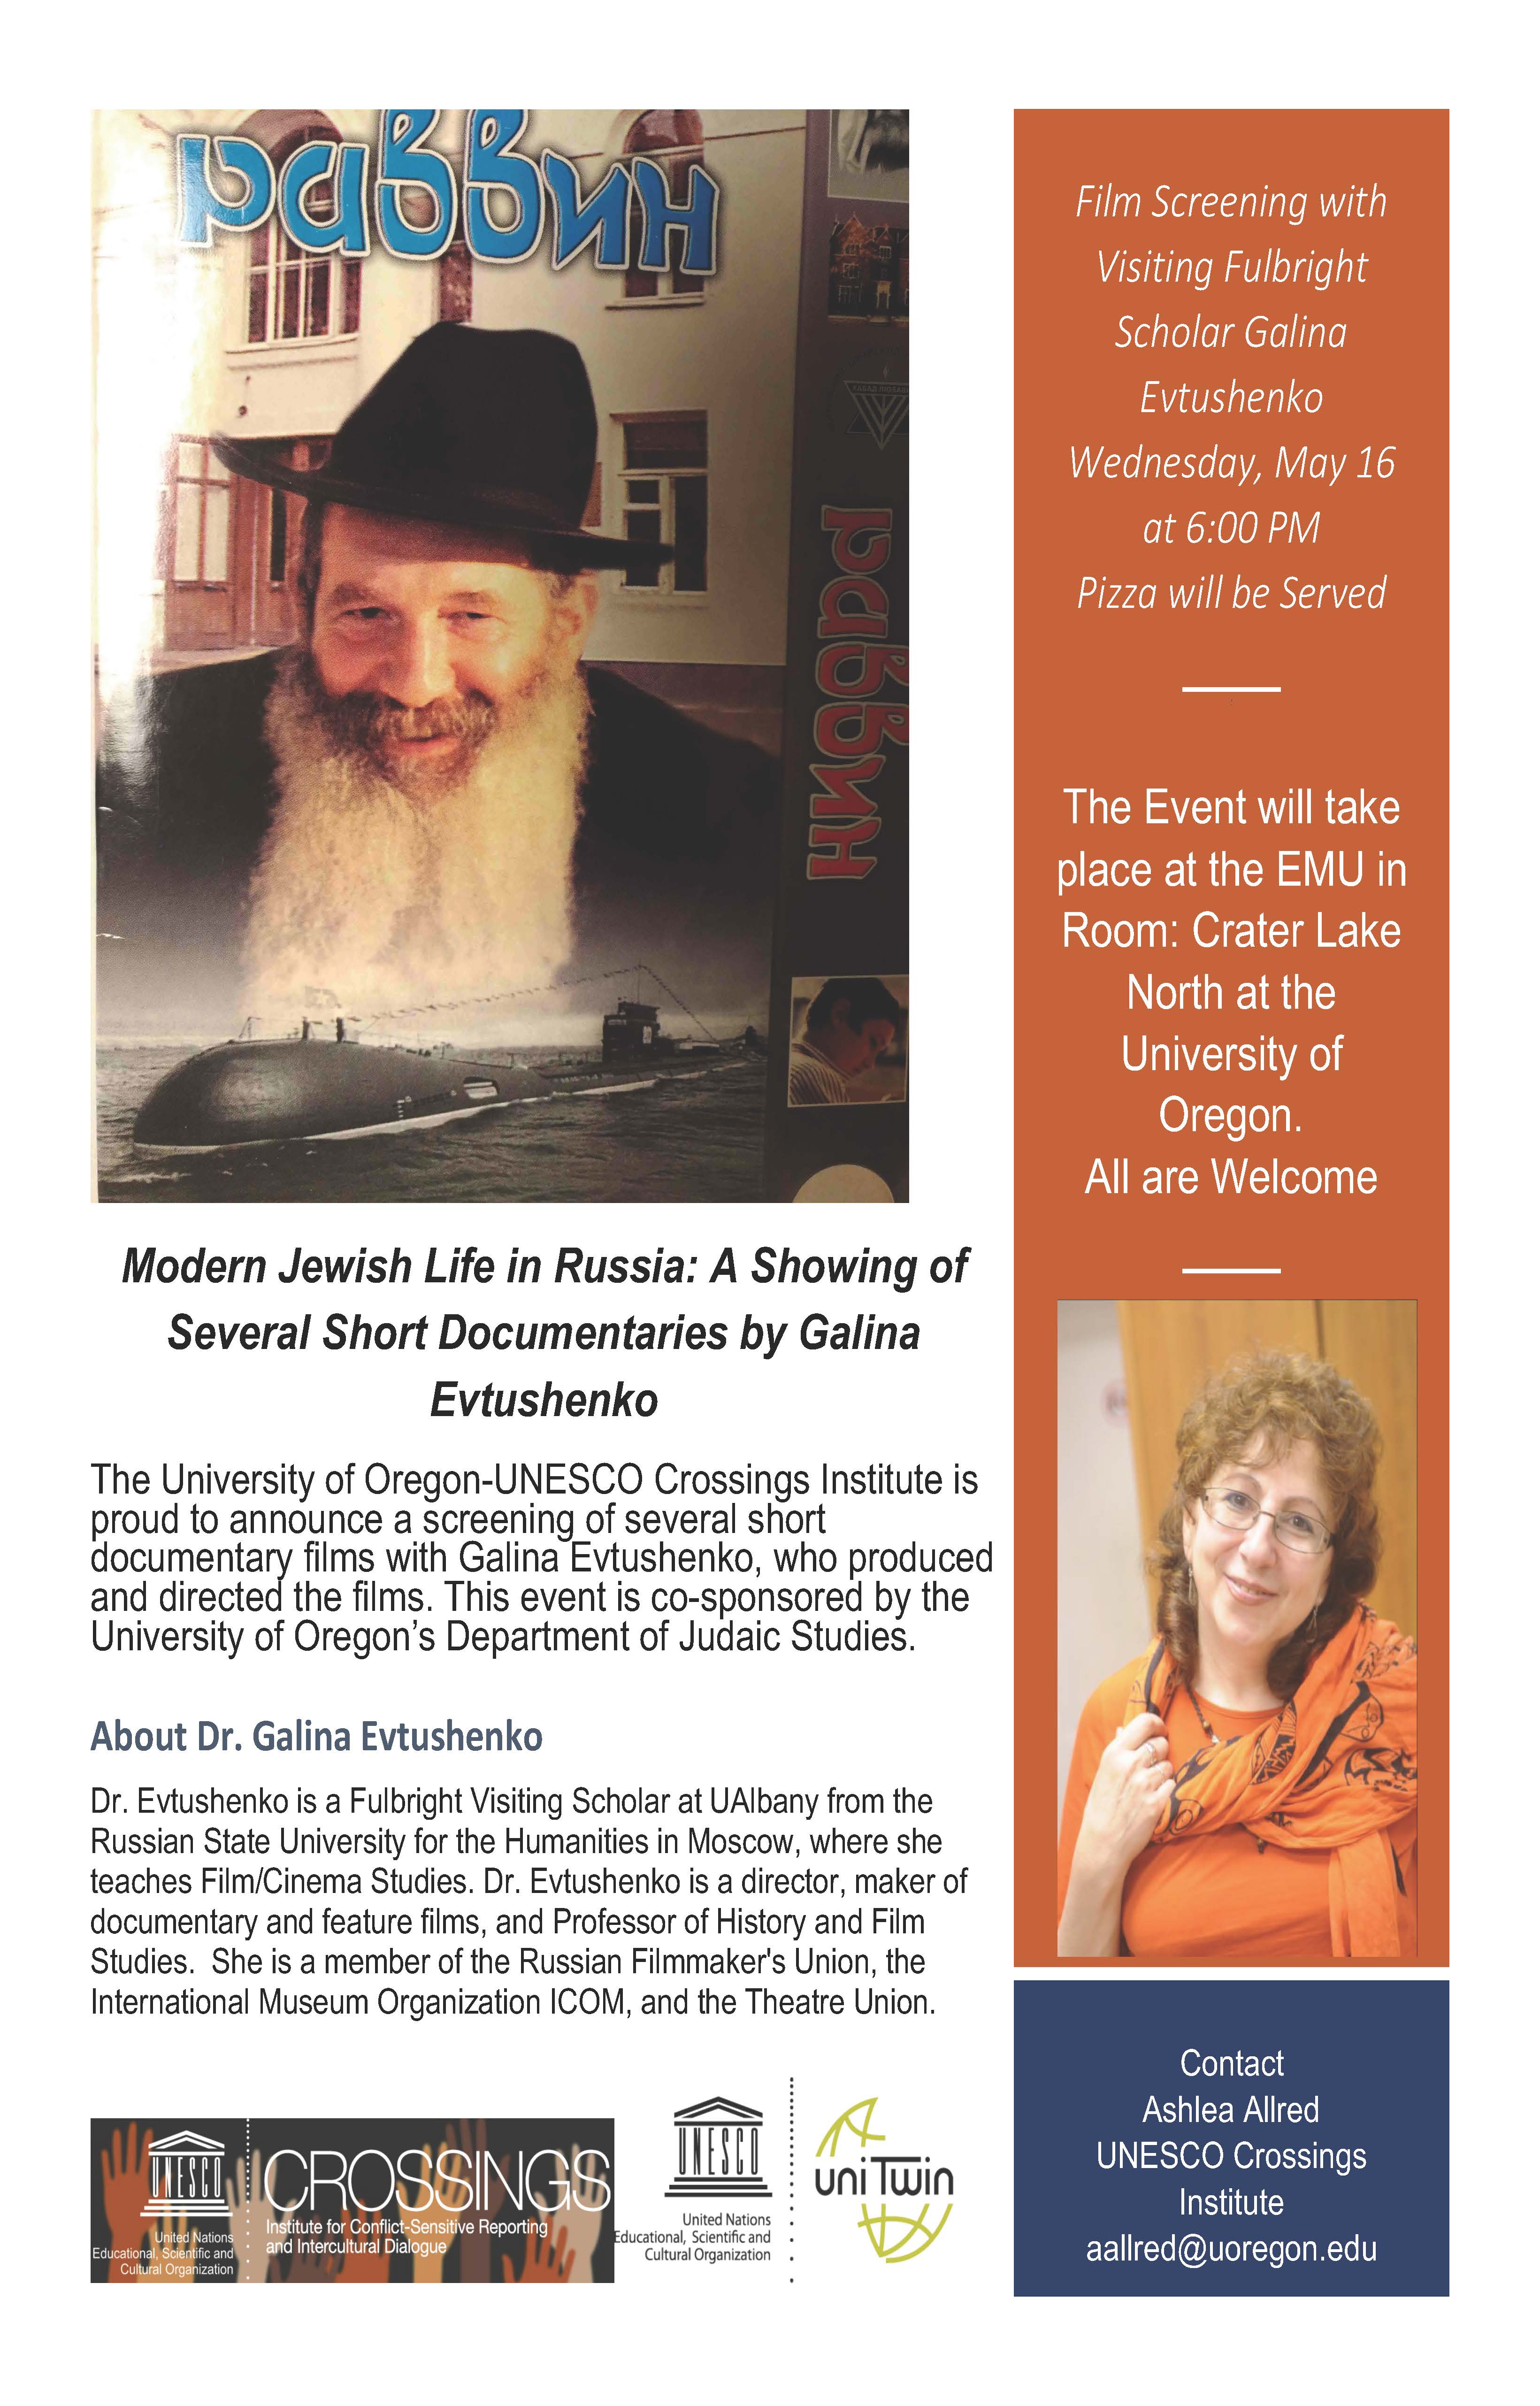 Modern Jewish Life in Russia: A Showing of Several Short Documentaries by Galina Evtushenko Event Poster